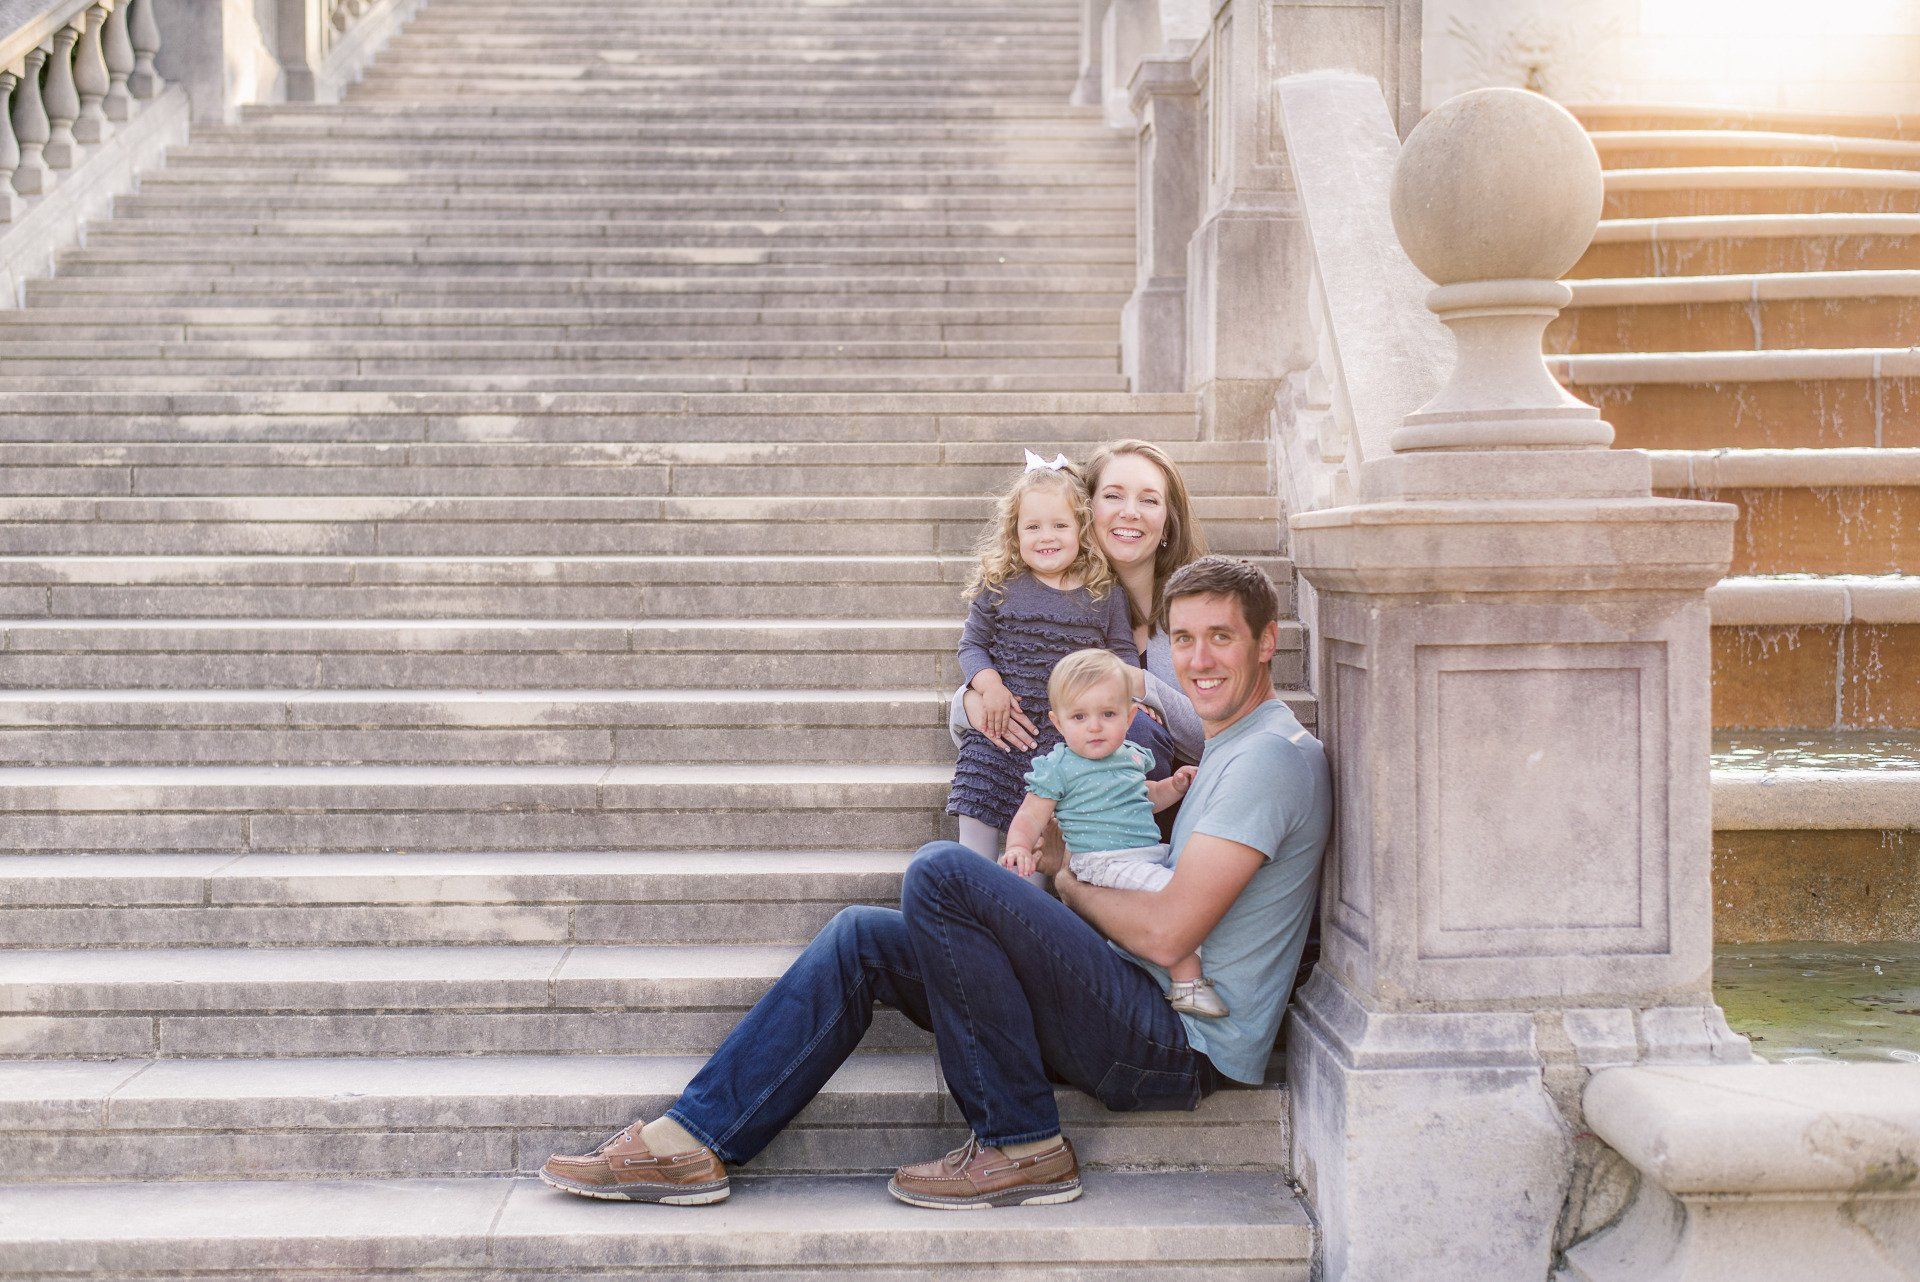 Dr. Annie Enzweiler and her family relaxing on steps image